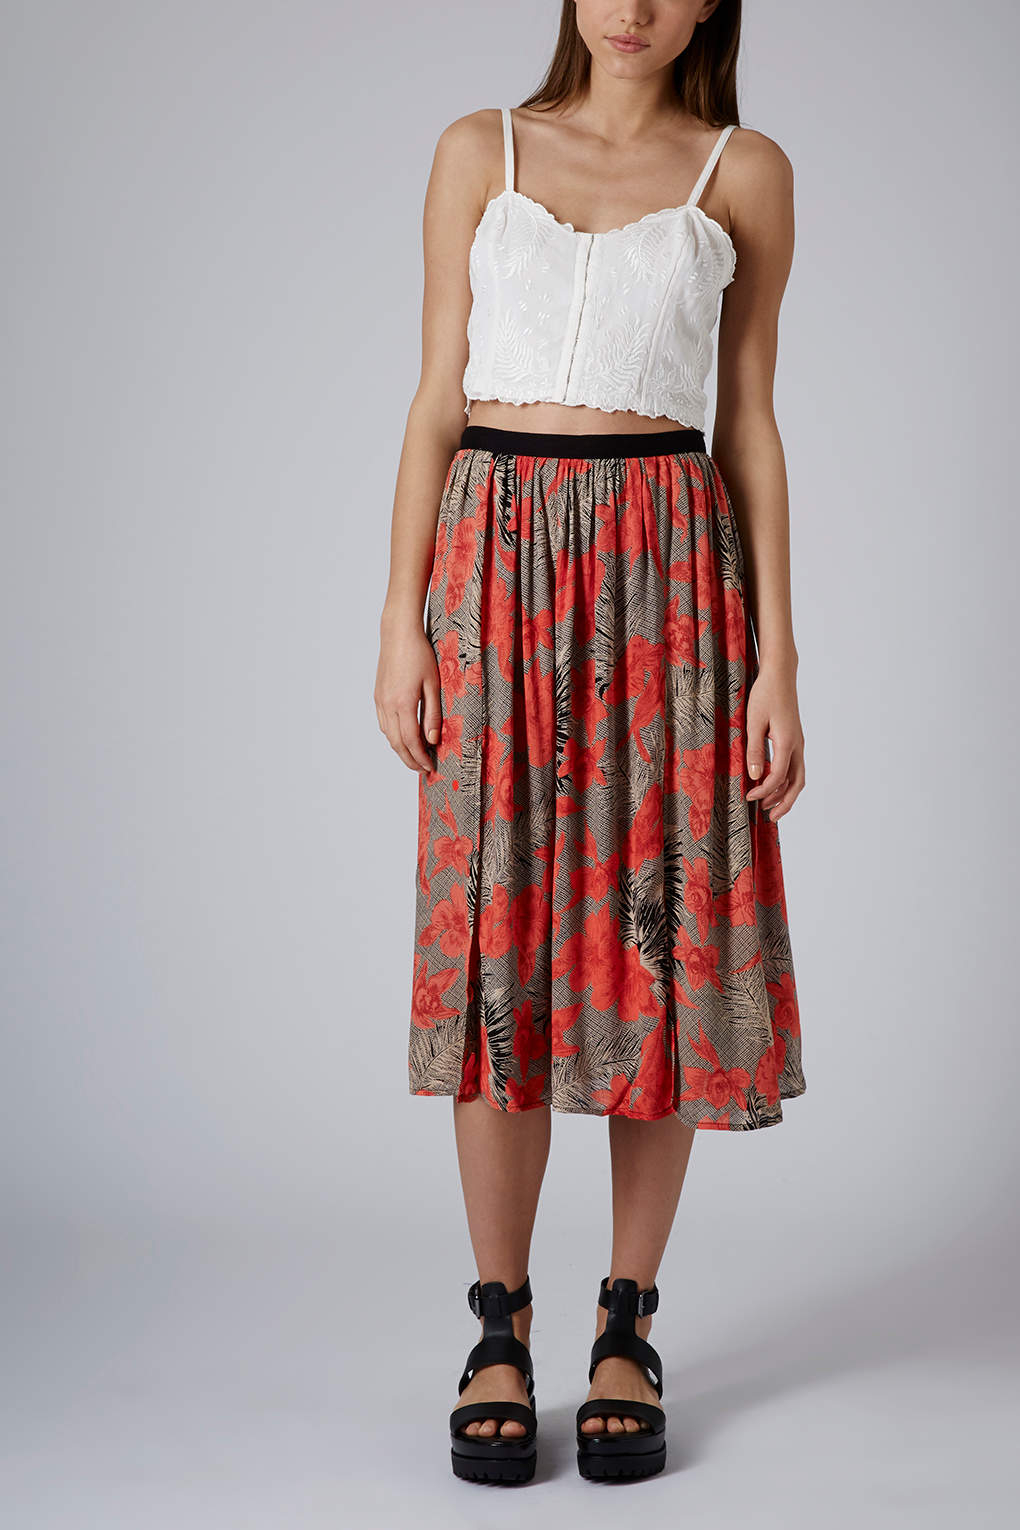 Topshop Floral Spliced Midi Skirt in Red | Lyst